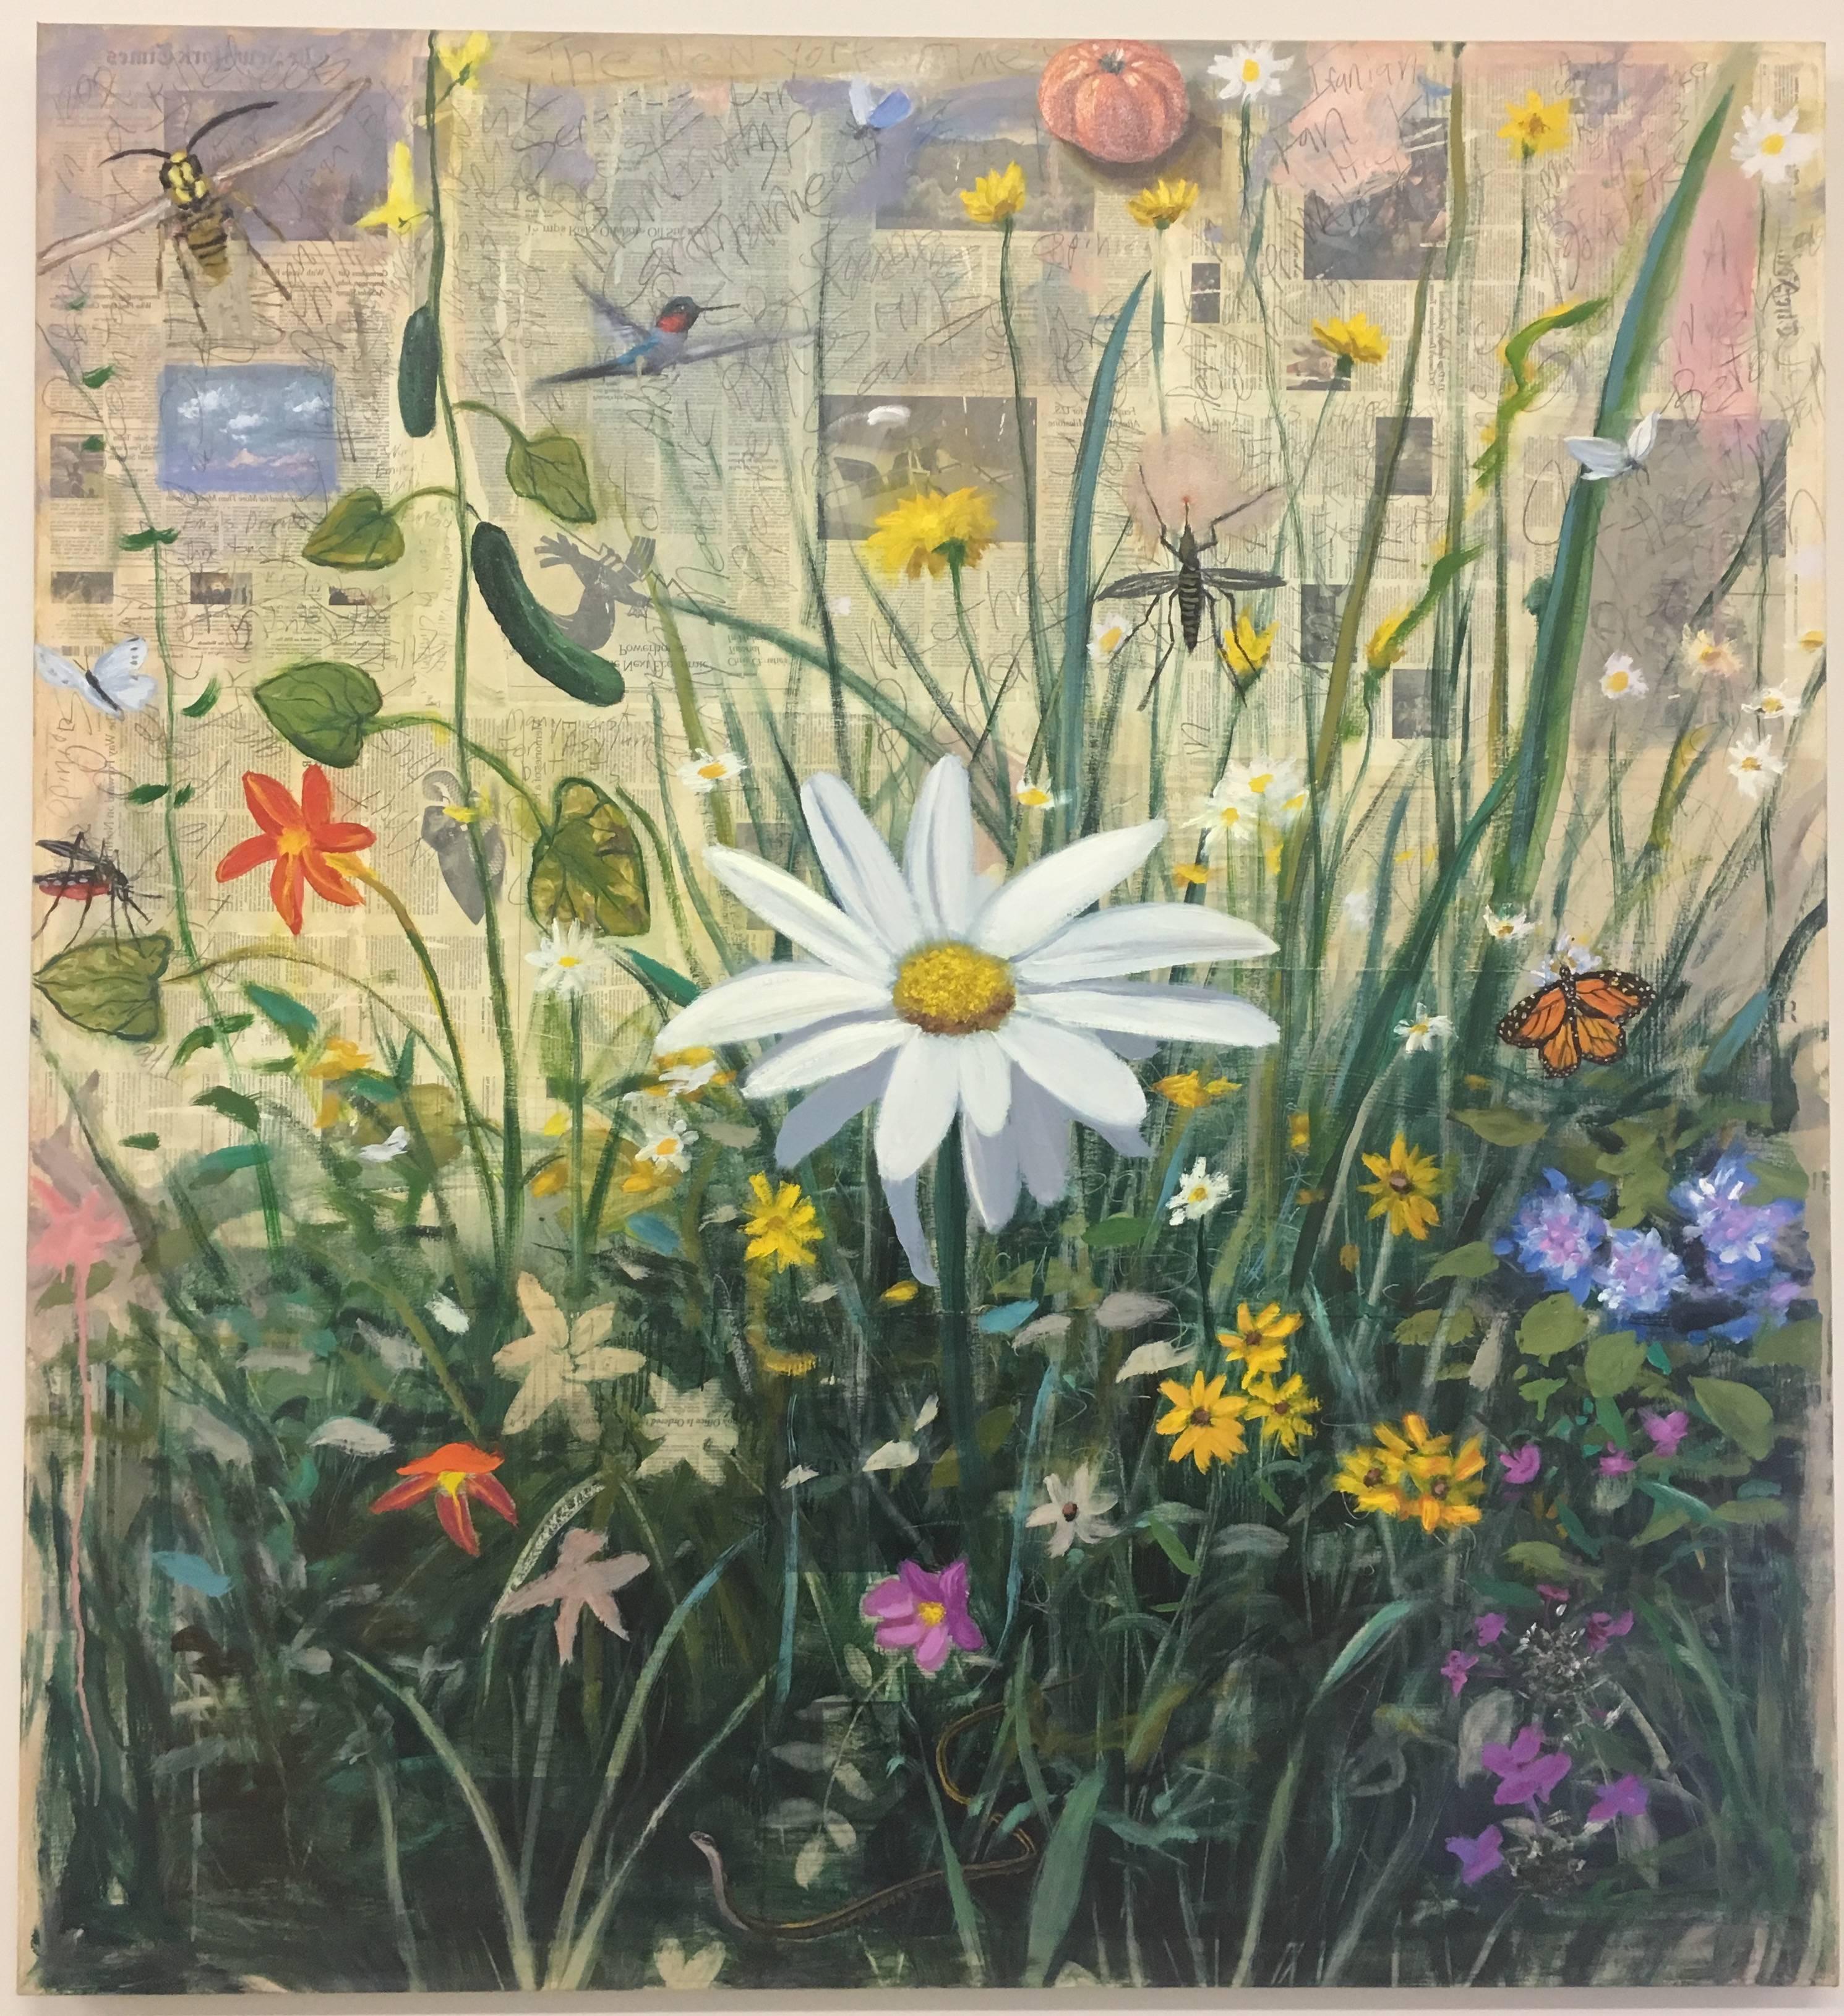 Old News; In the Garden - Painting by Adam Straus